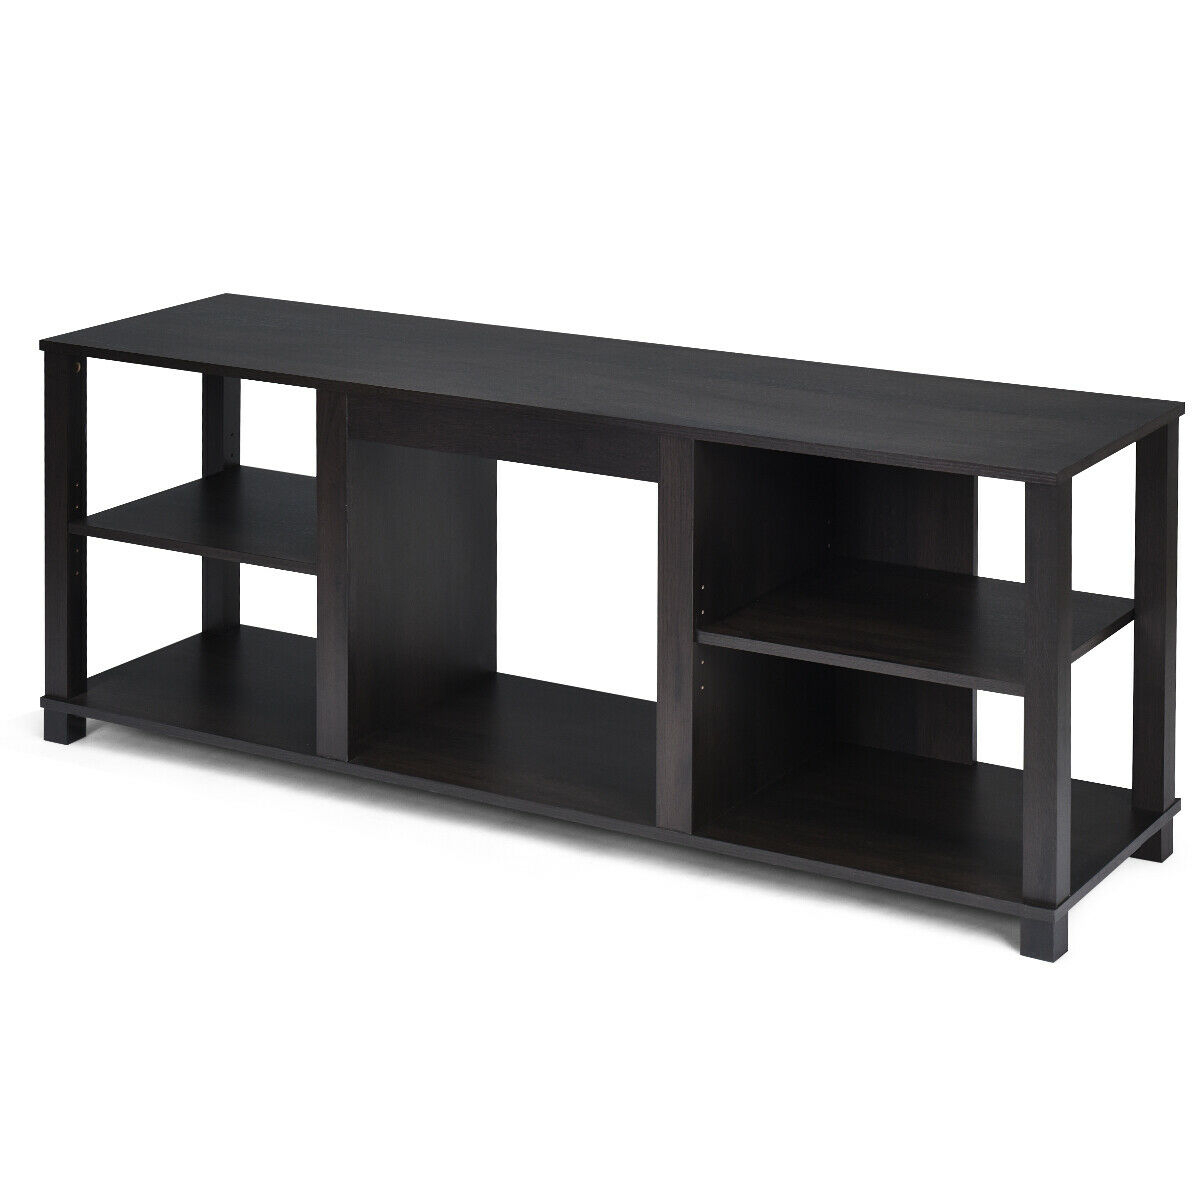 2-Tier TV Stand Storage Cabinet Console Adjustable Shelves Living Room UP TO 65